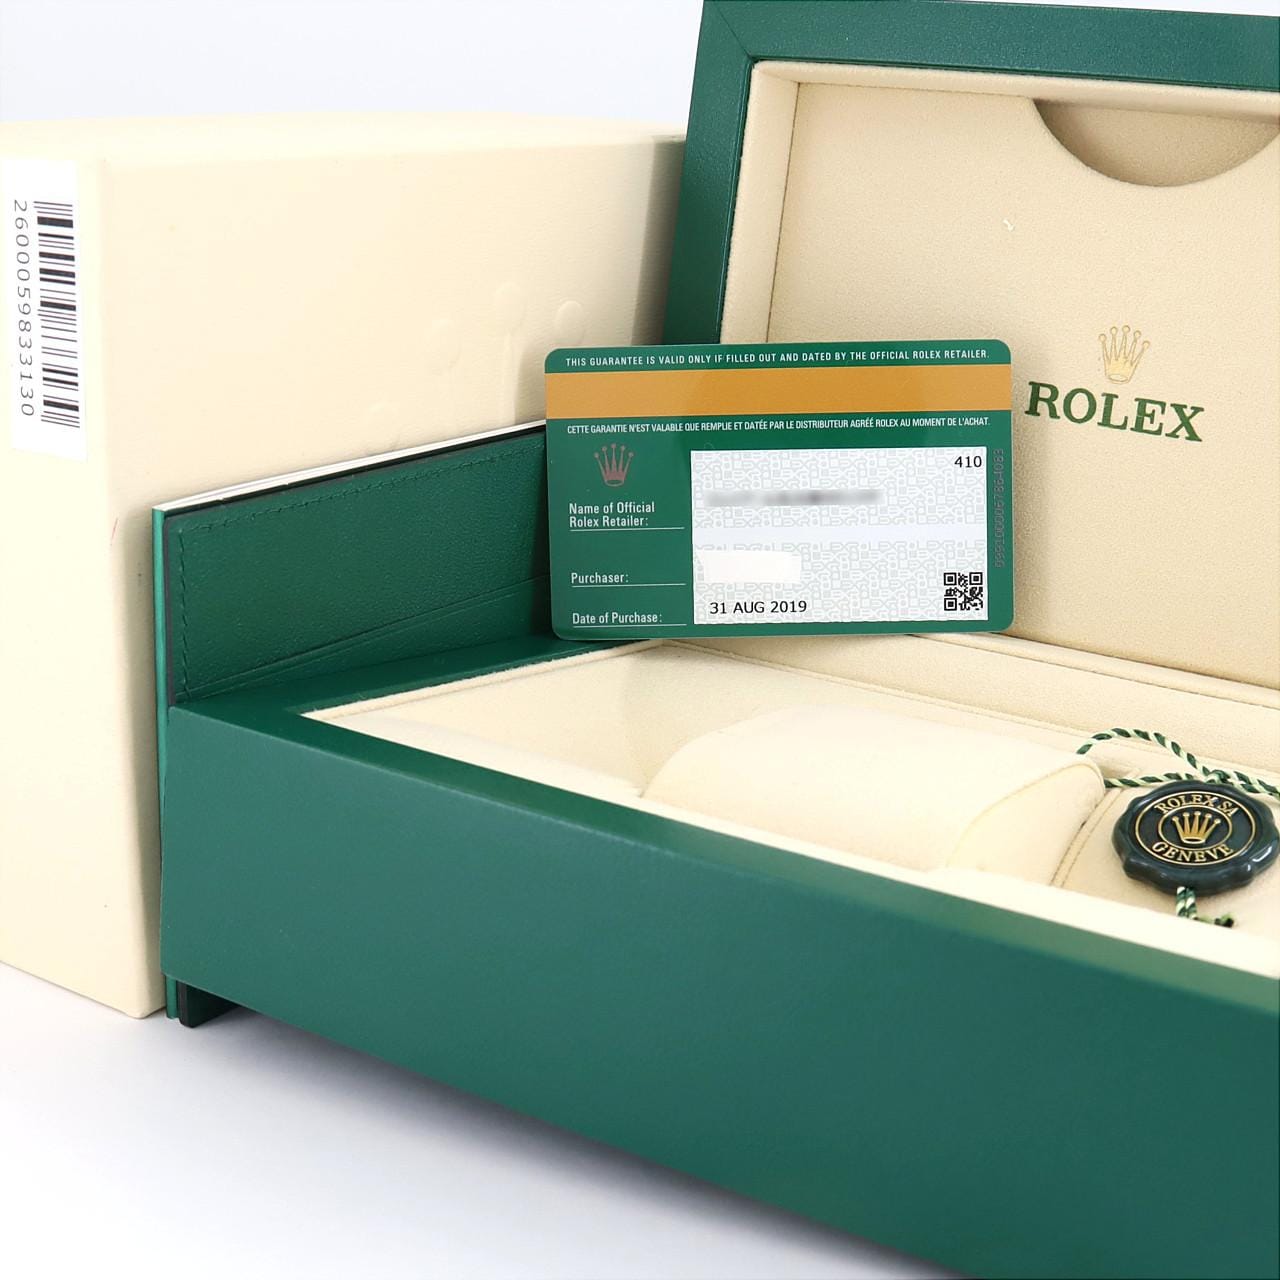 ROLEX Datejust 279174 SSxWG Automatic Random Number